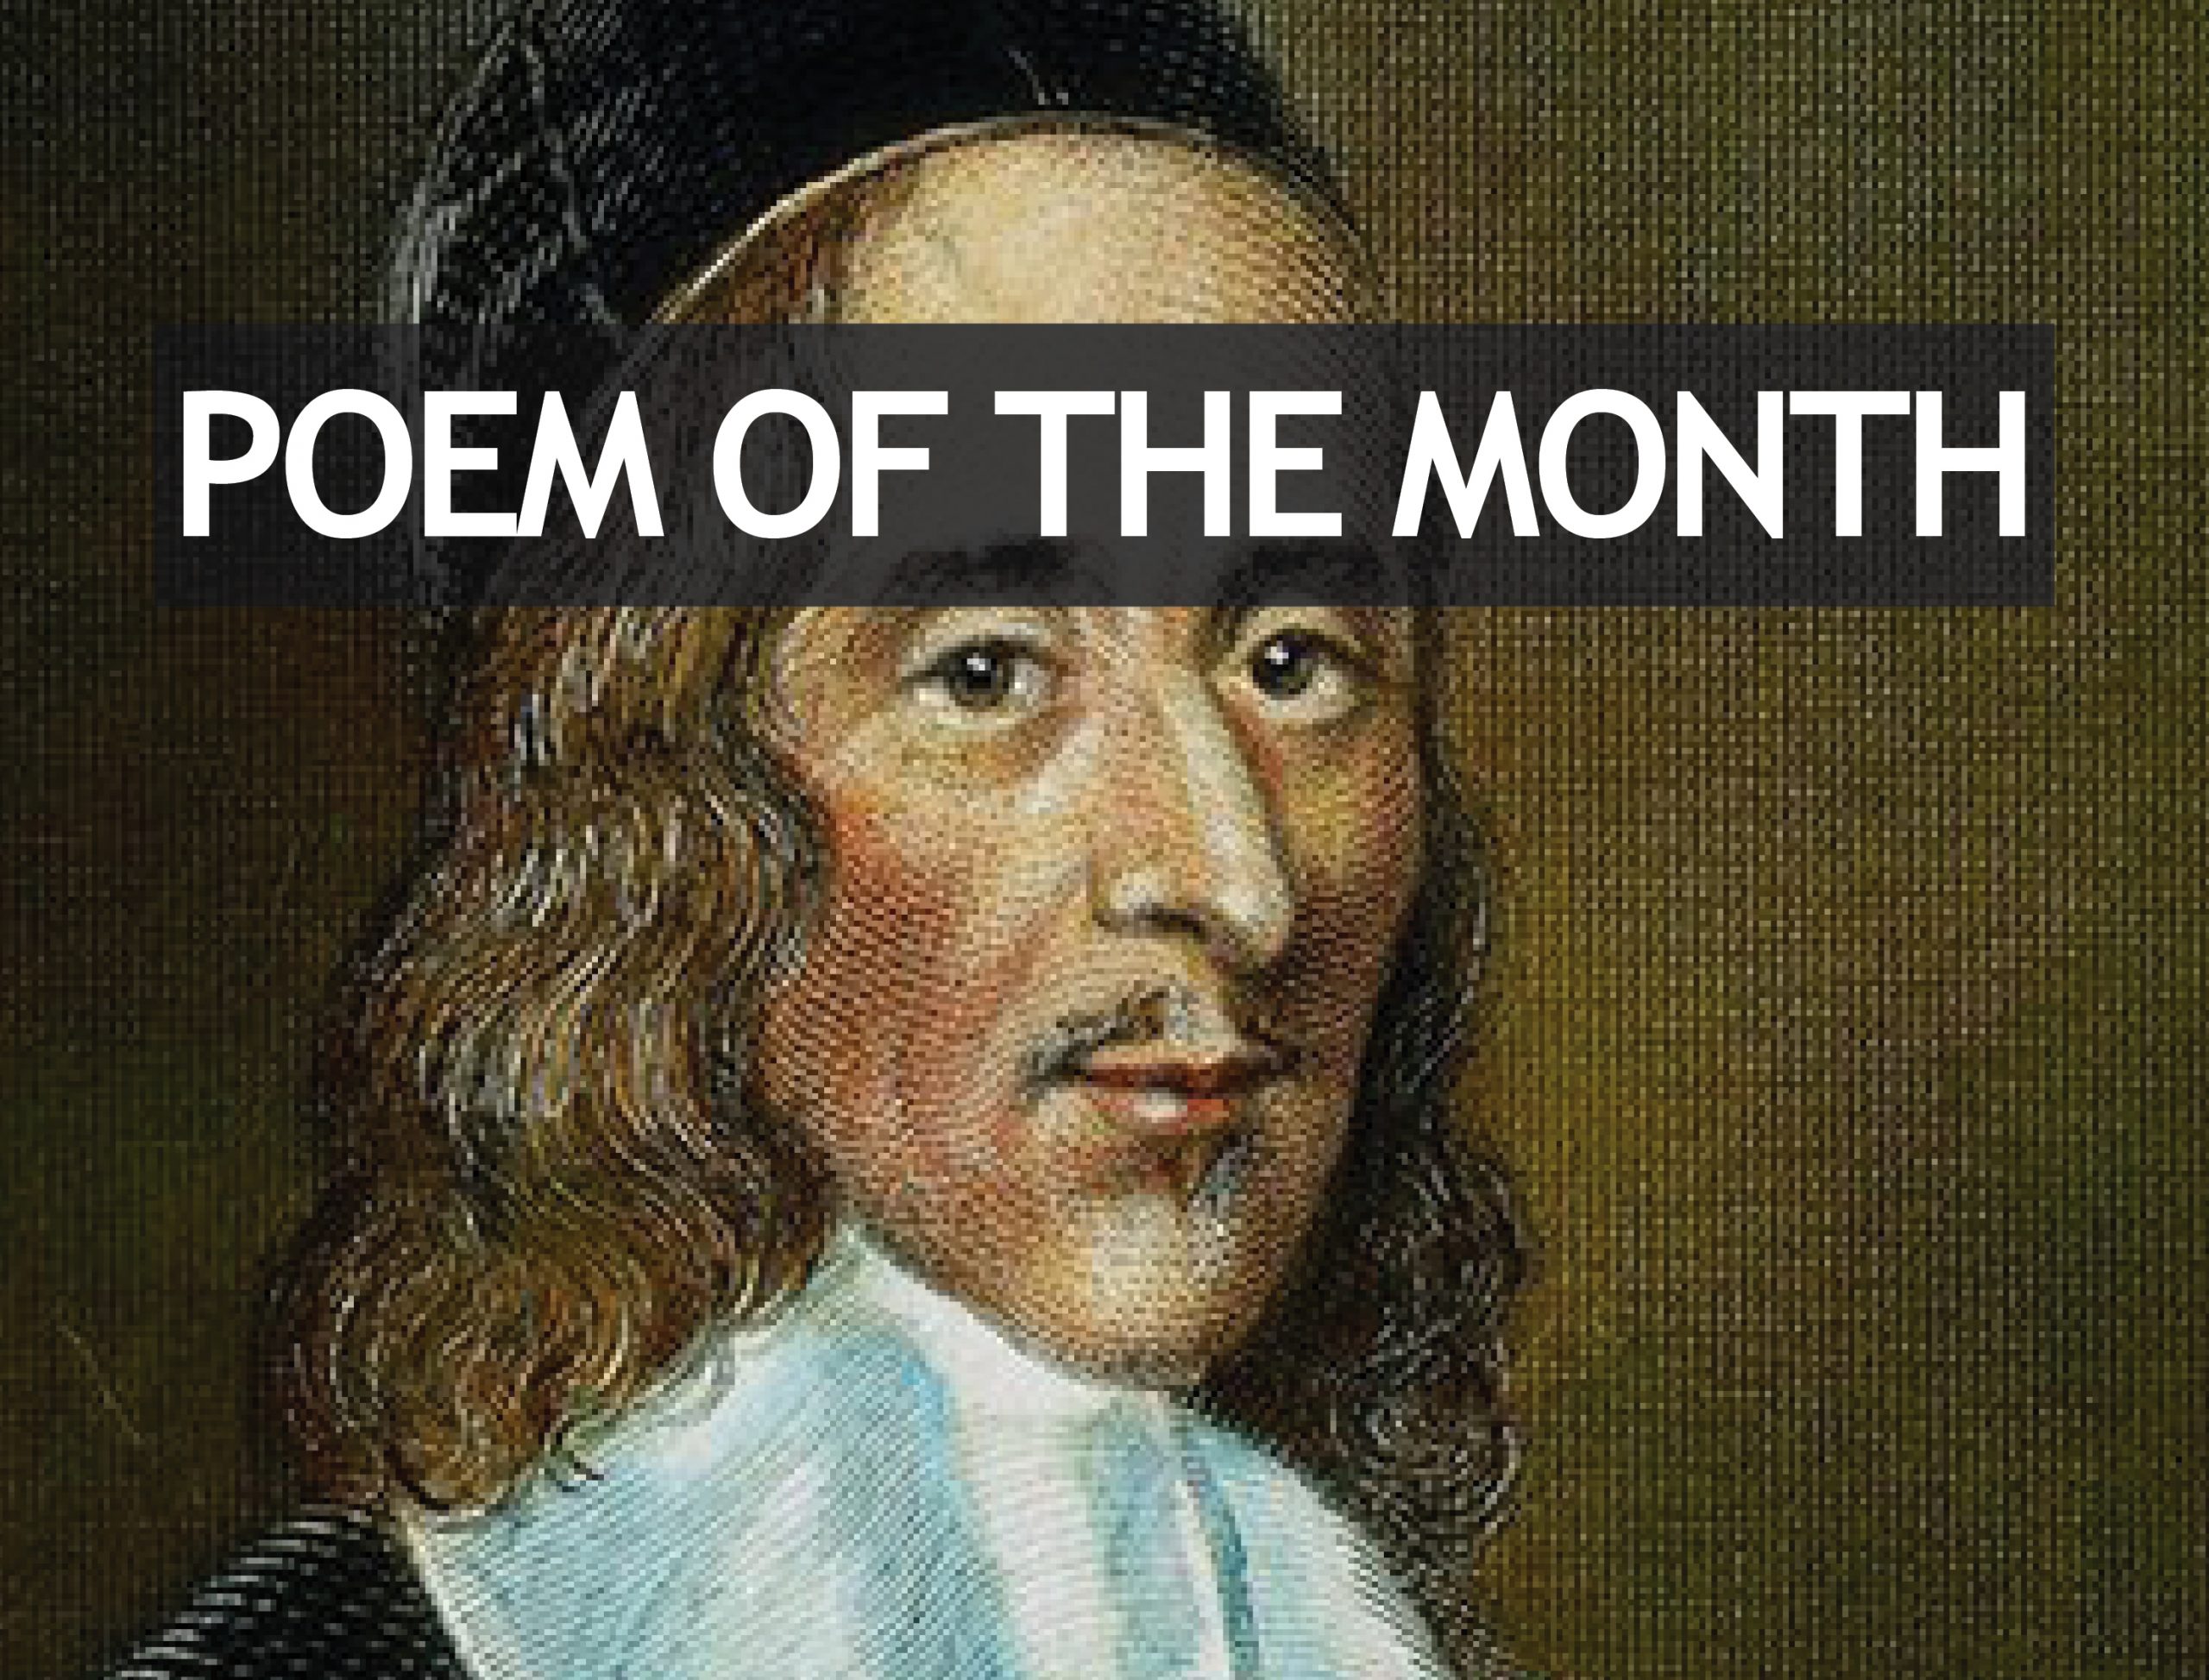 Poem of the Month – March